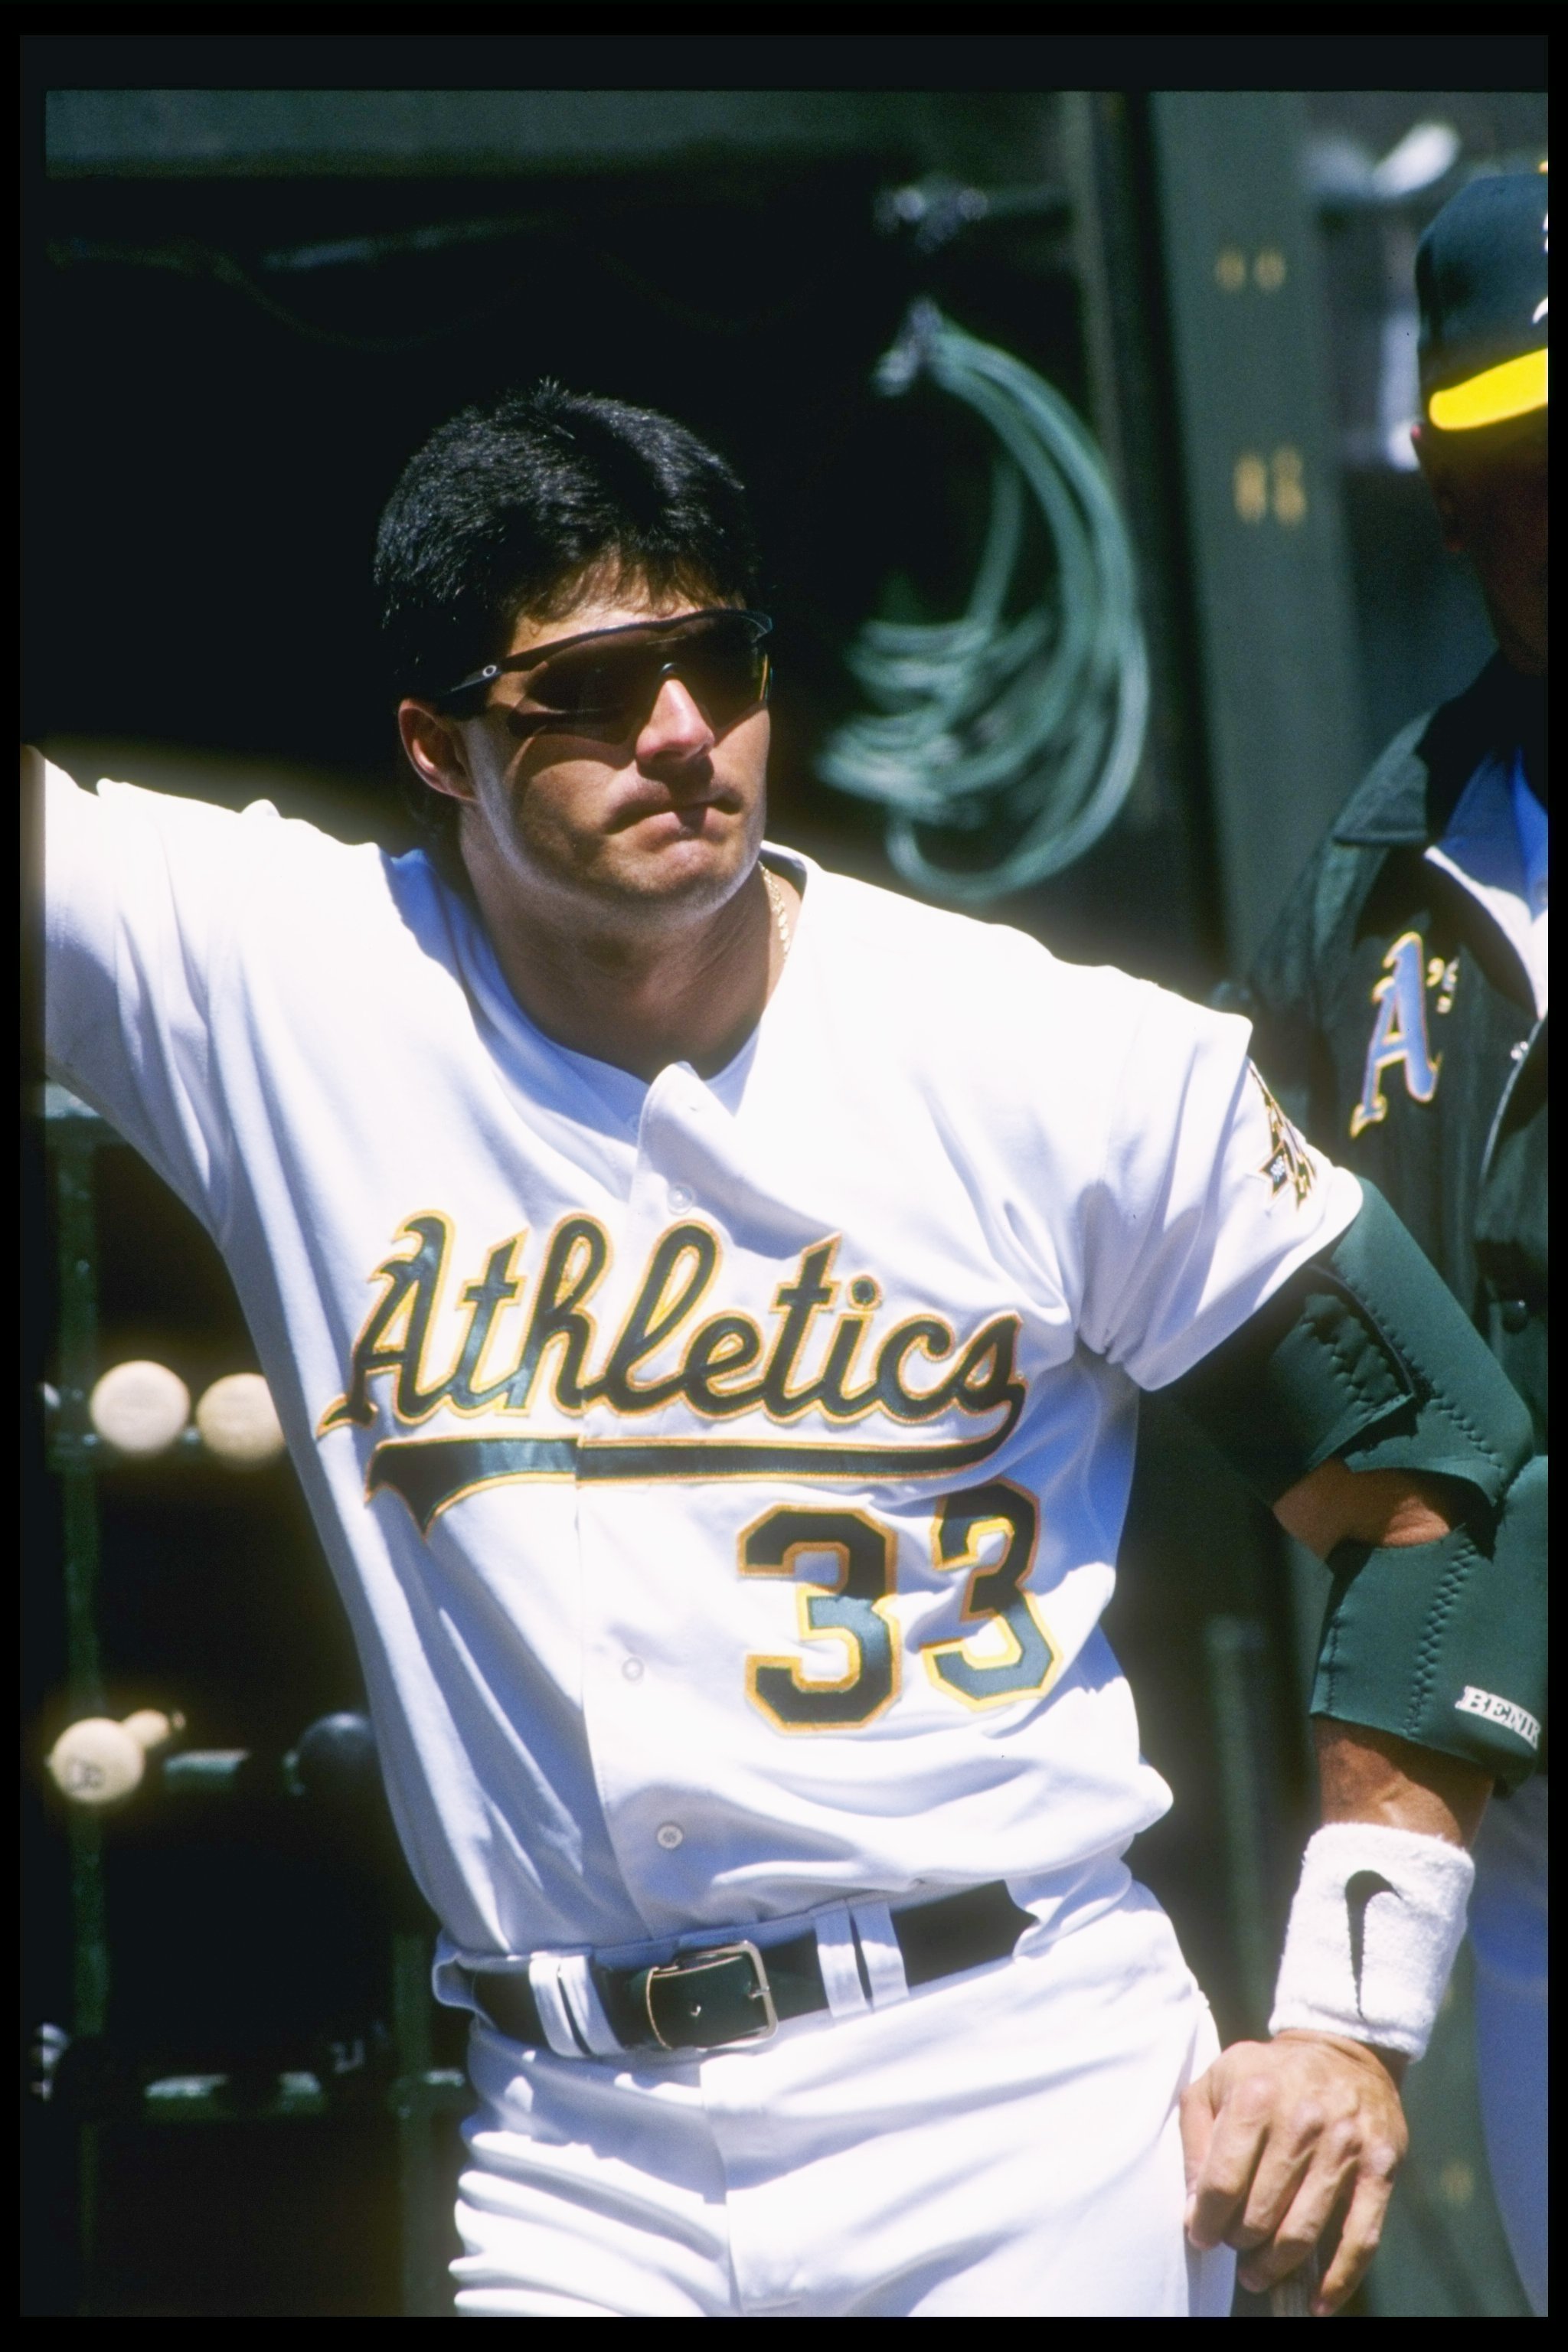 Oakland A's: Remembering Rickey Henderson's greatness